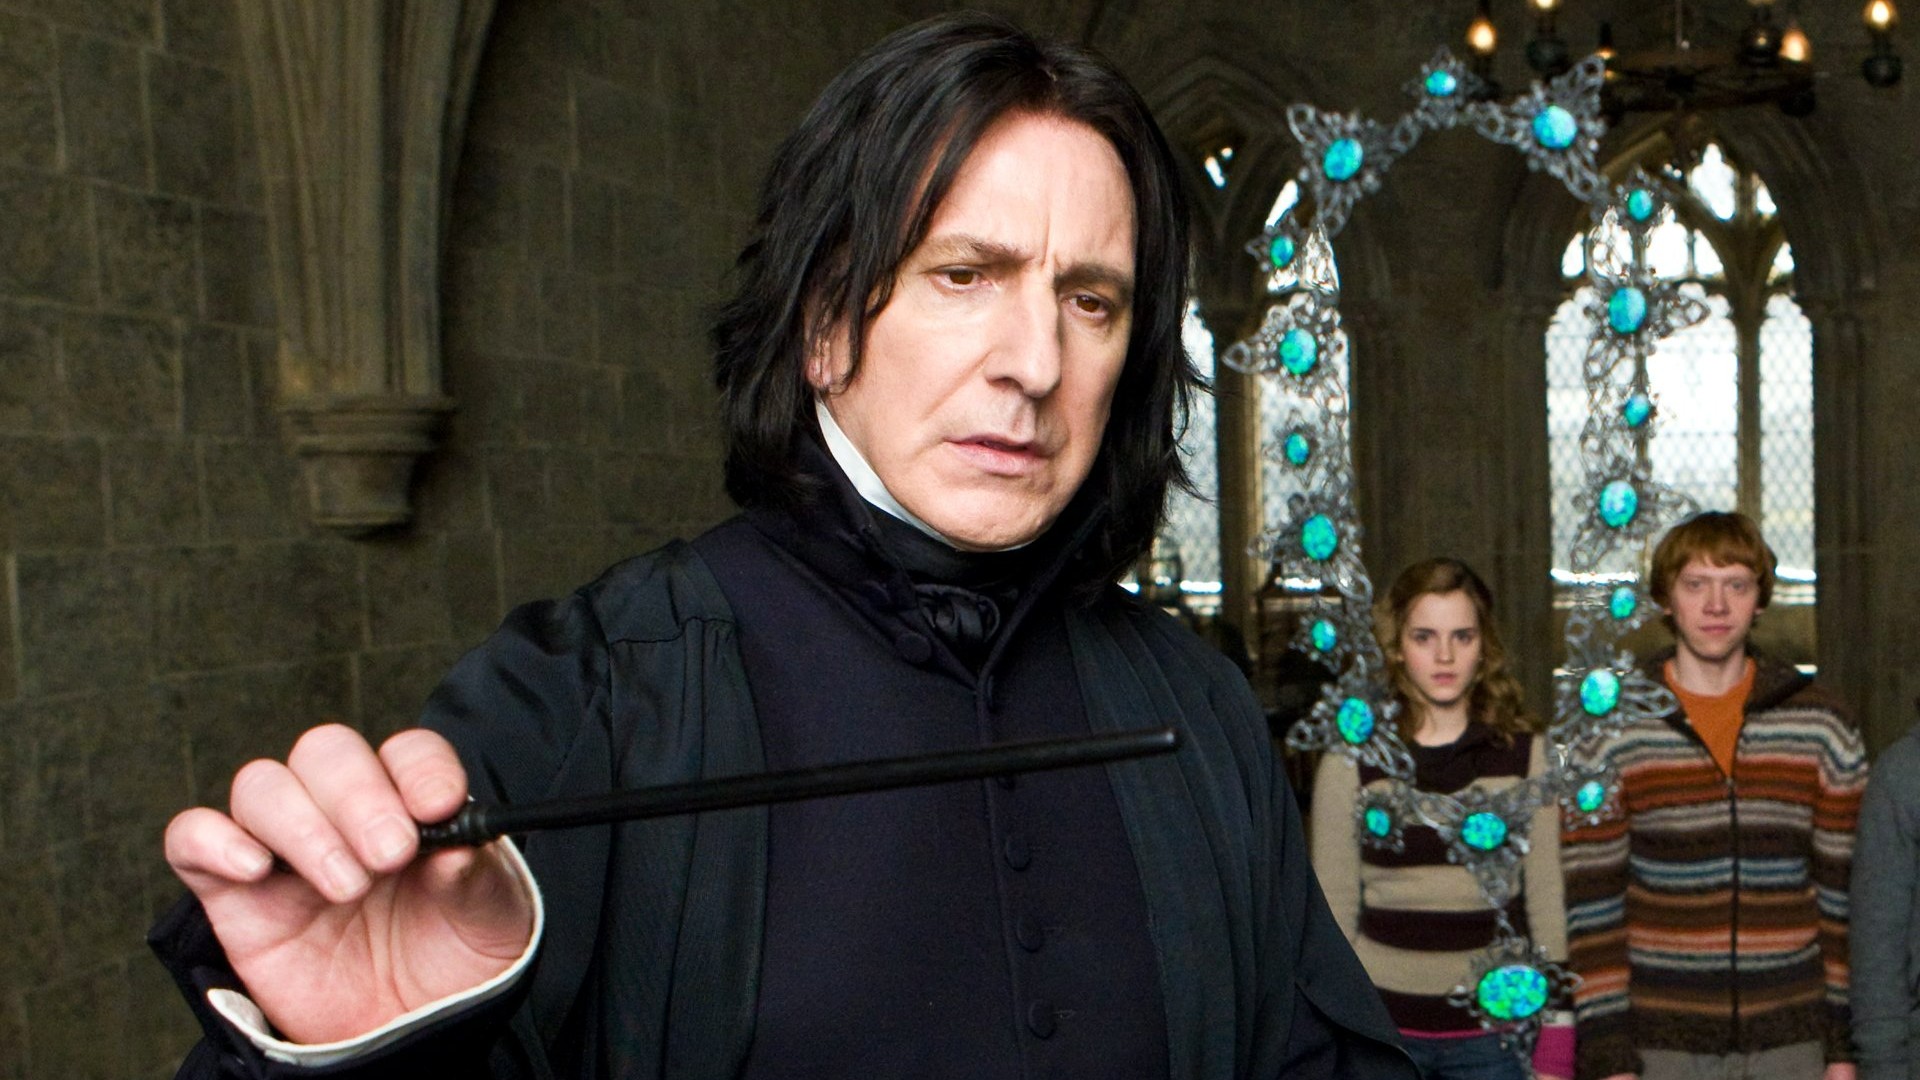 The Top 5 Reasons Why Snape Failed Harry in Occlumency (Hint: It’s Not Harry’s Fault)